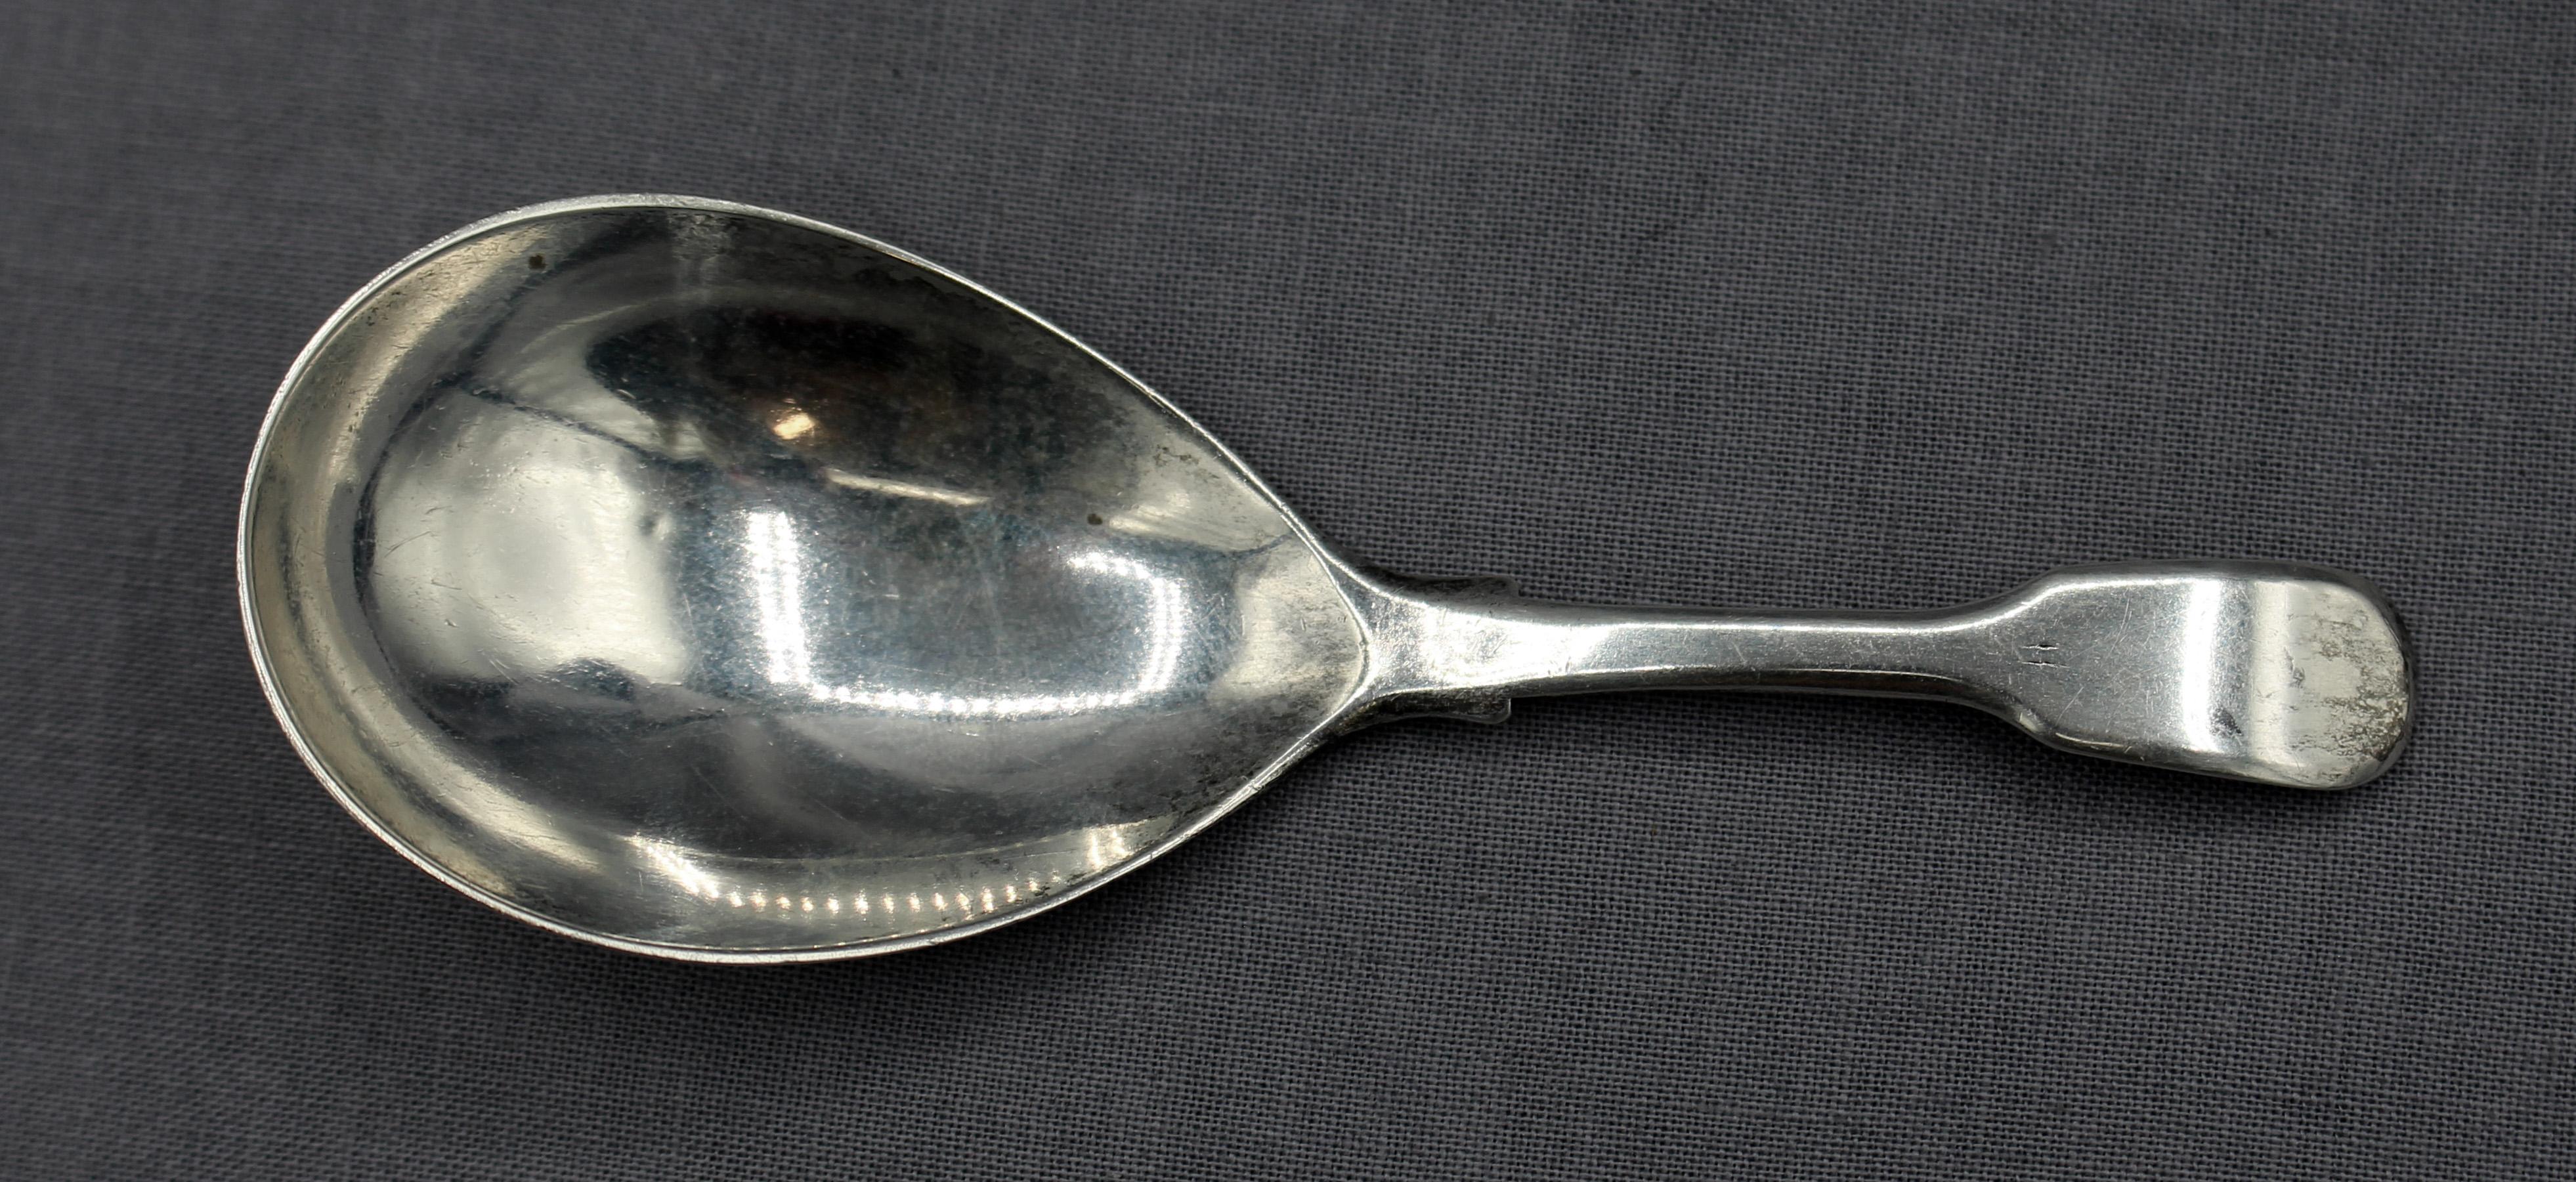 19th Century 1817 George III Sterling Silver Tea Caddy Spoon For Sale